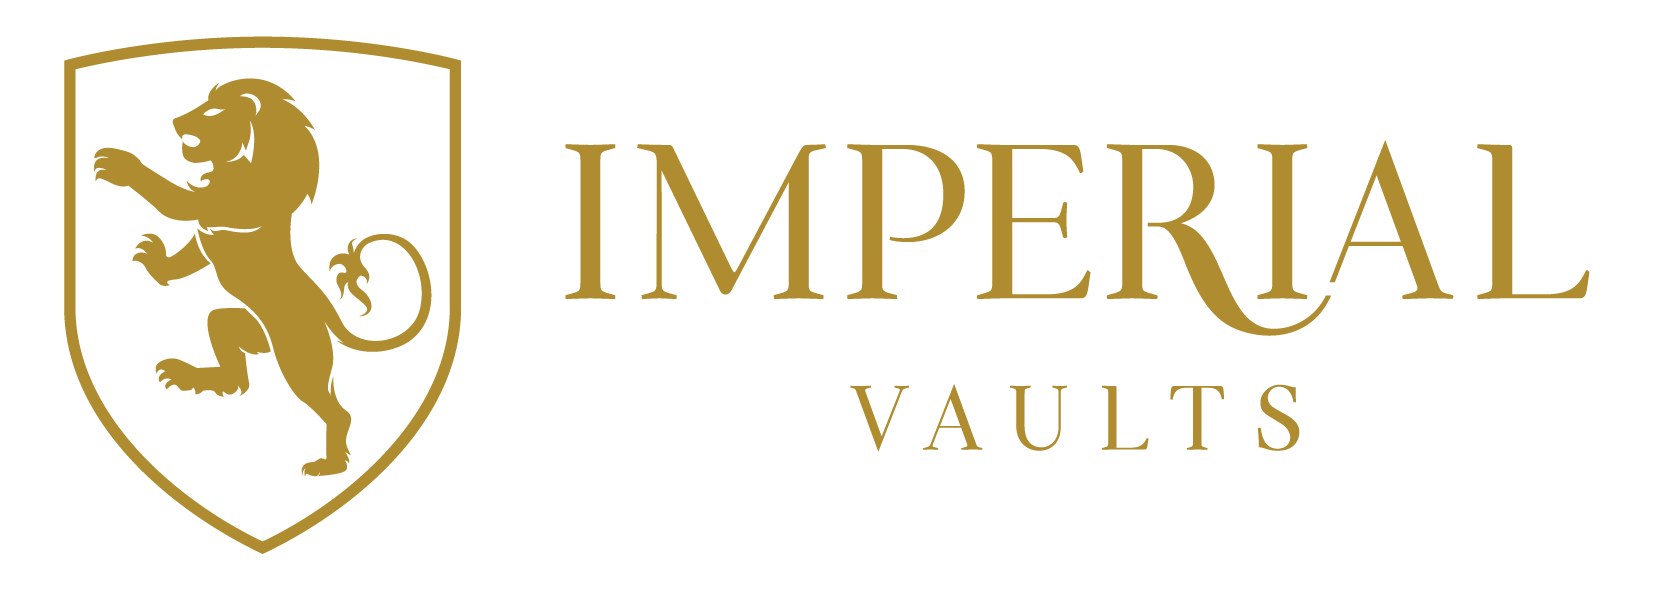 Imperial Vaults